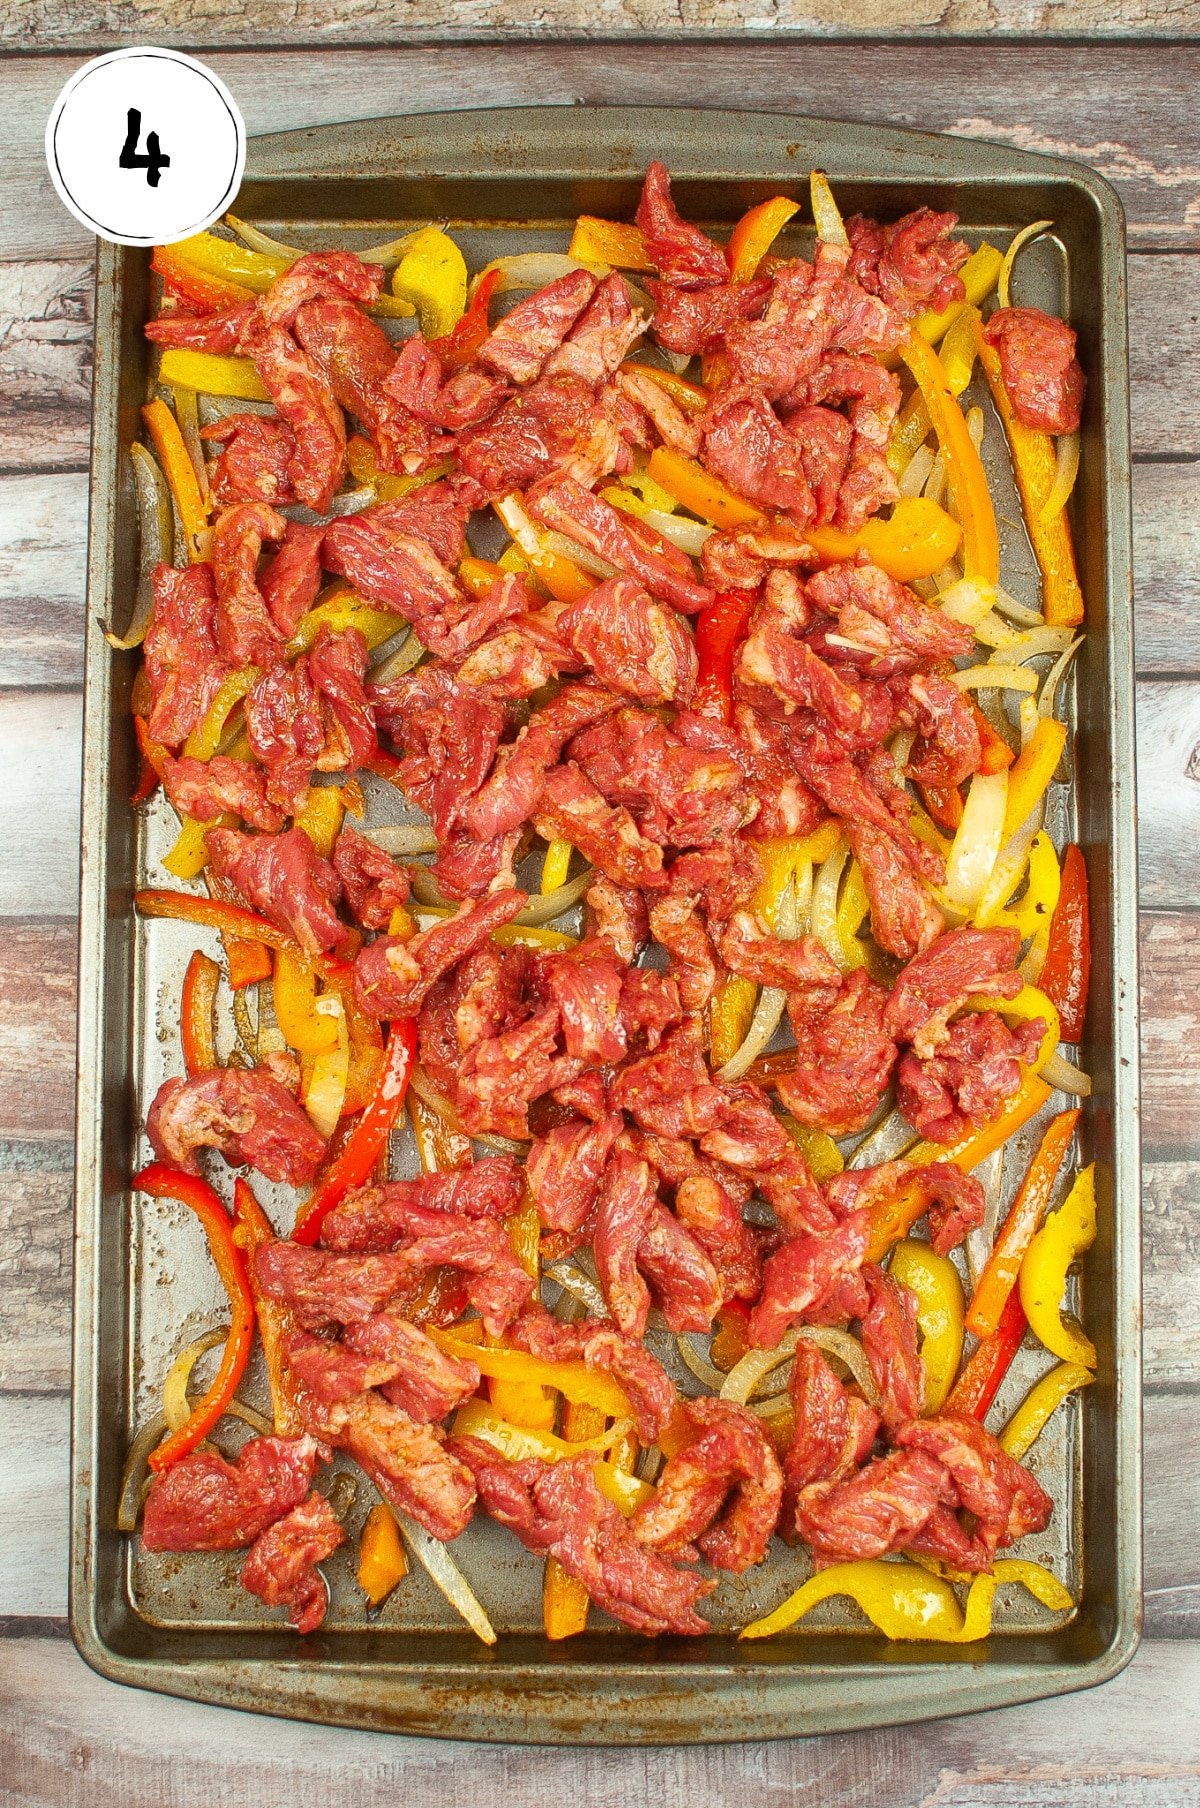 Steak, peppers and onions on roasting pan.